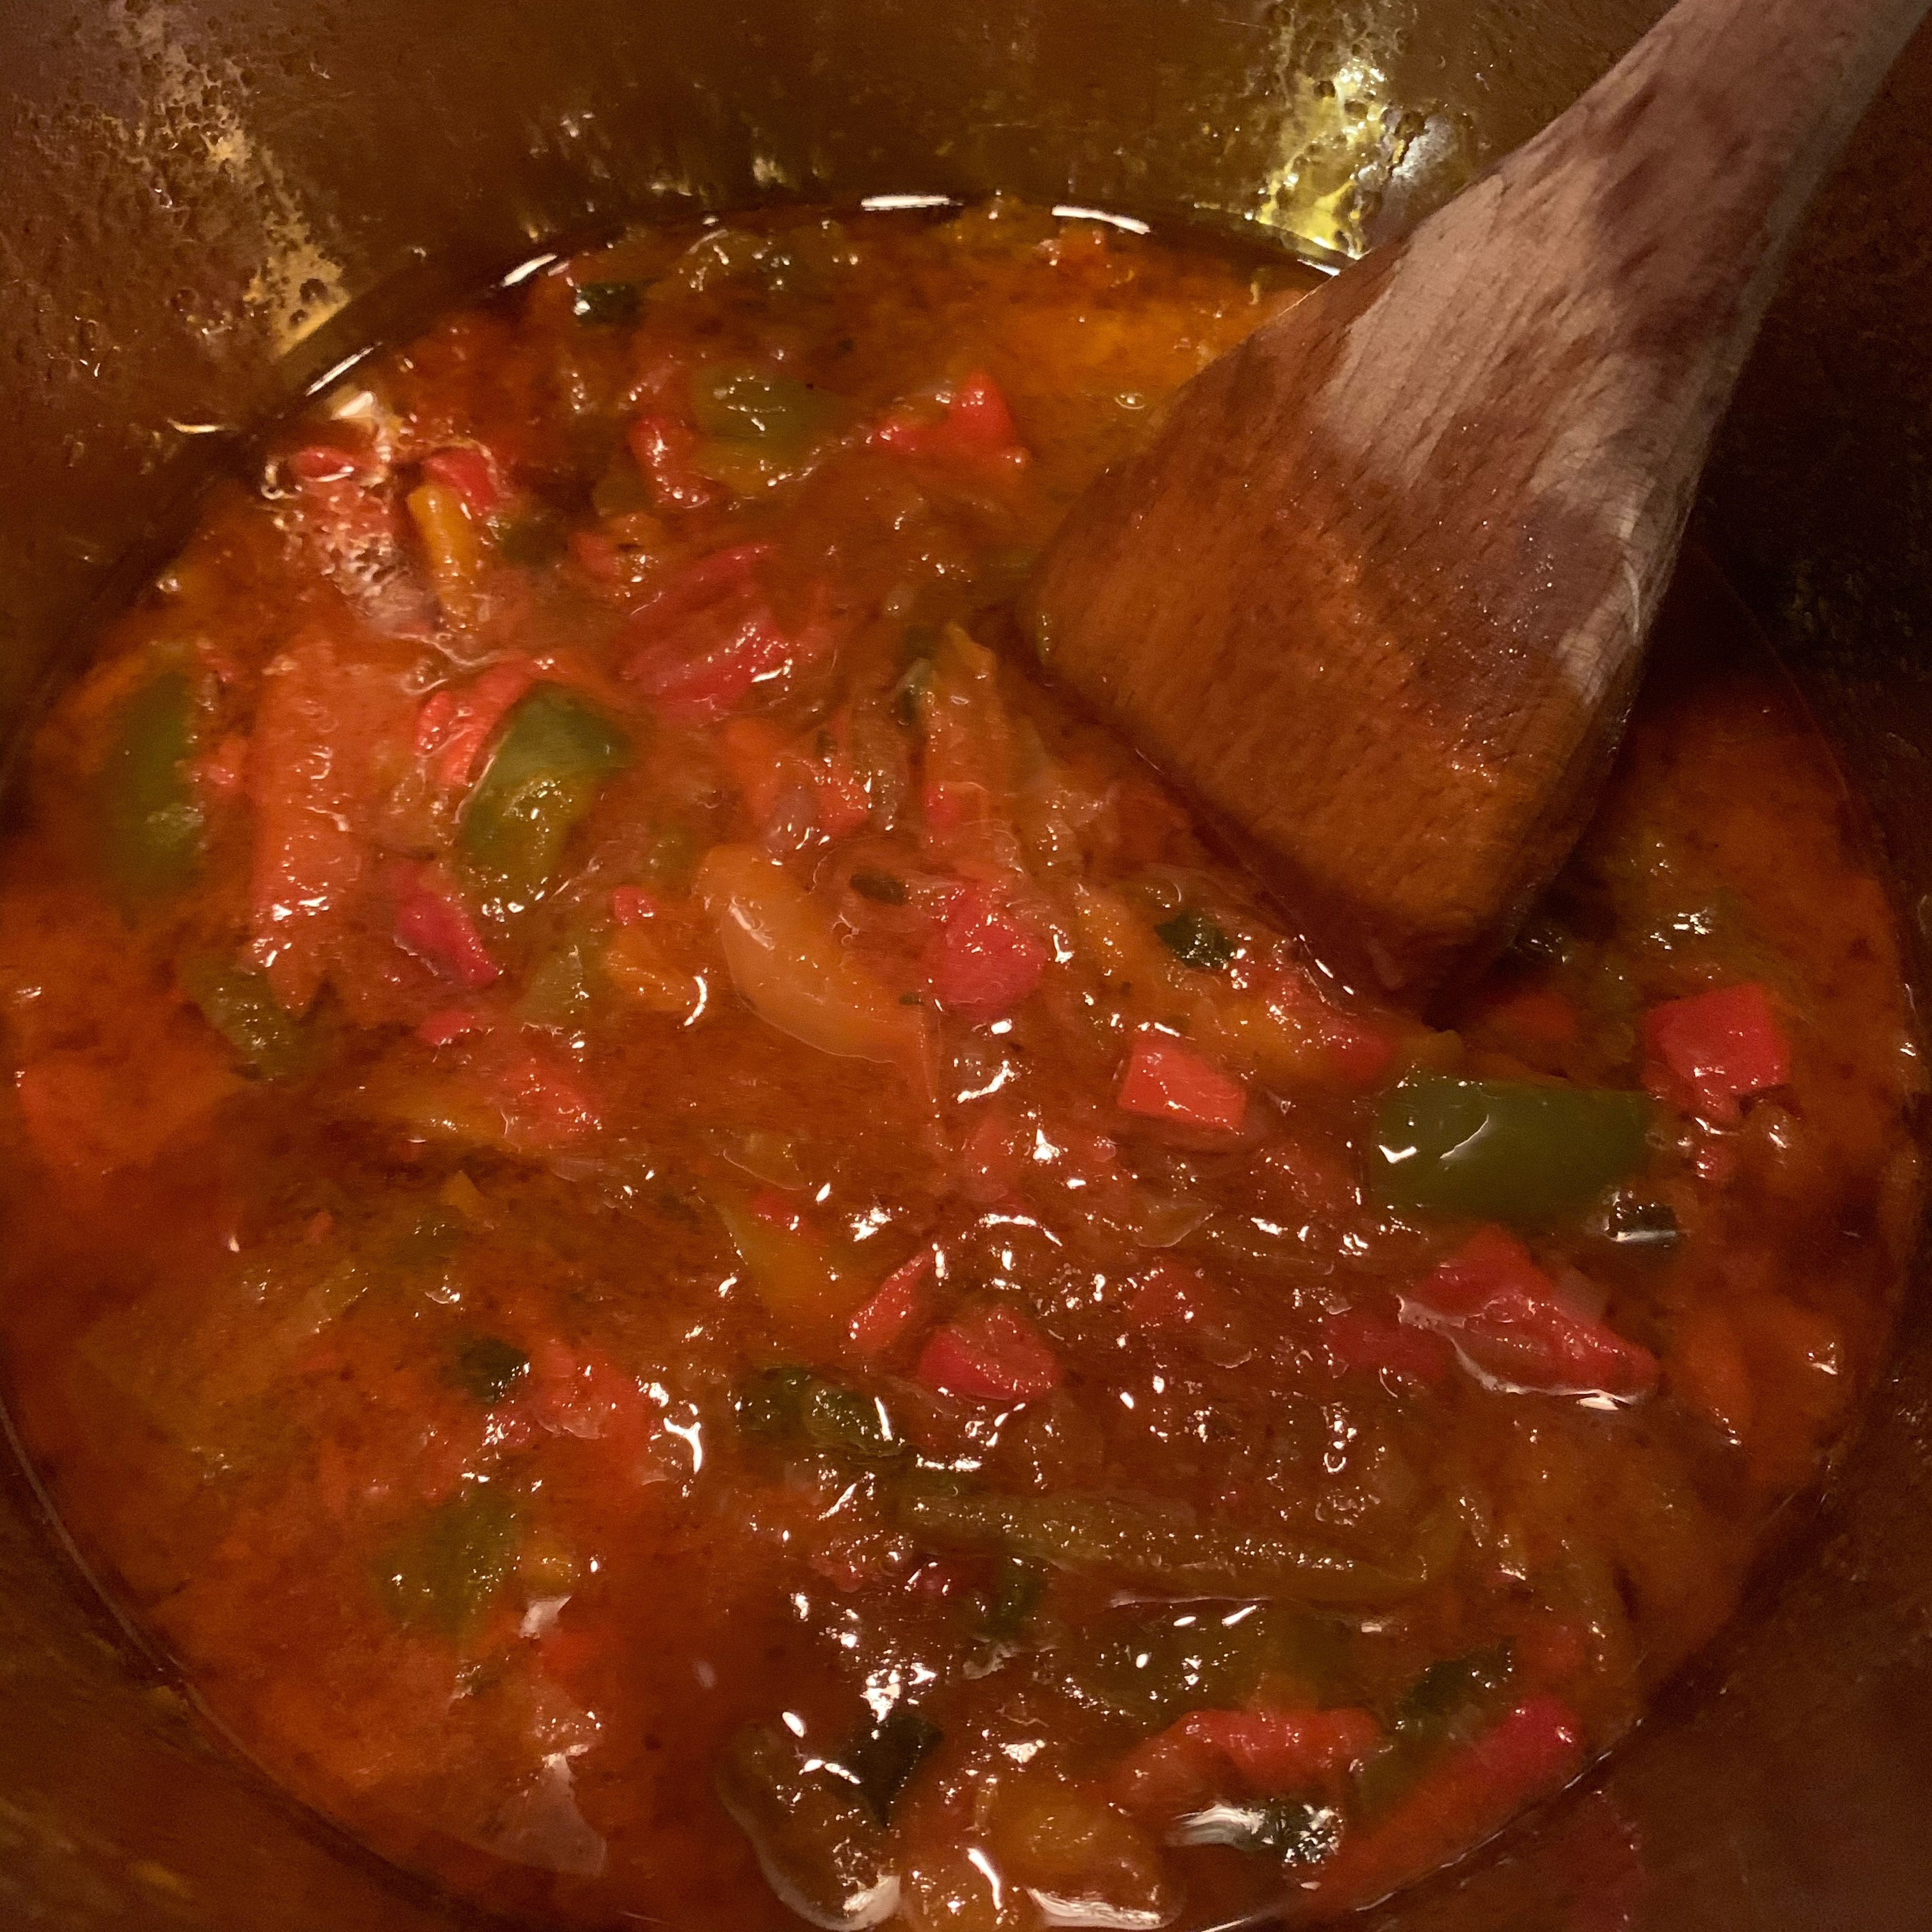 Add in peppers!! Keep heat on medium low and cover pot. Watch the juice from the peppers flow out and concentrate the flavors into the oil by reducing on low heat for the next 5 hours. Once the consistency is thickened a bit, your peperonata is ready!